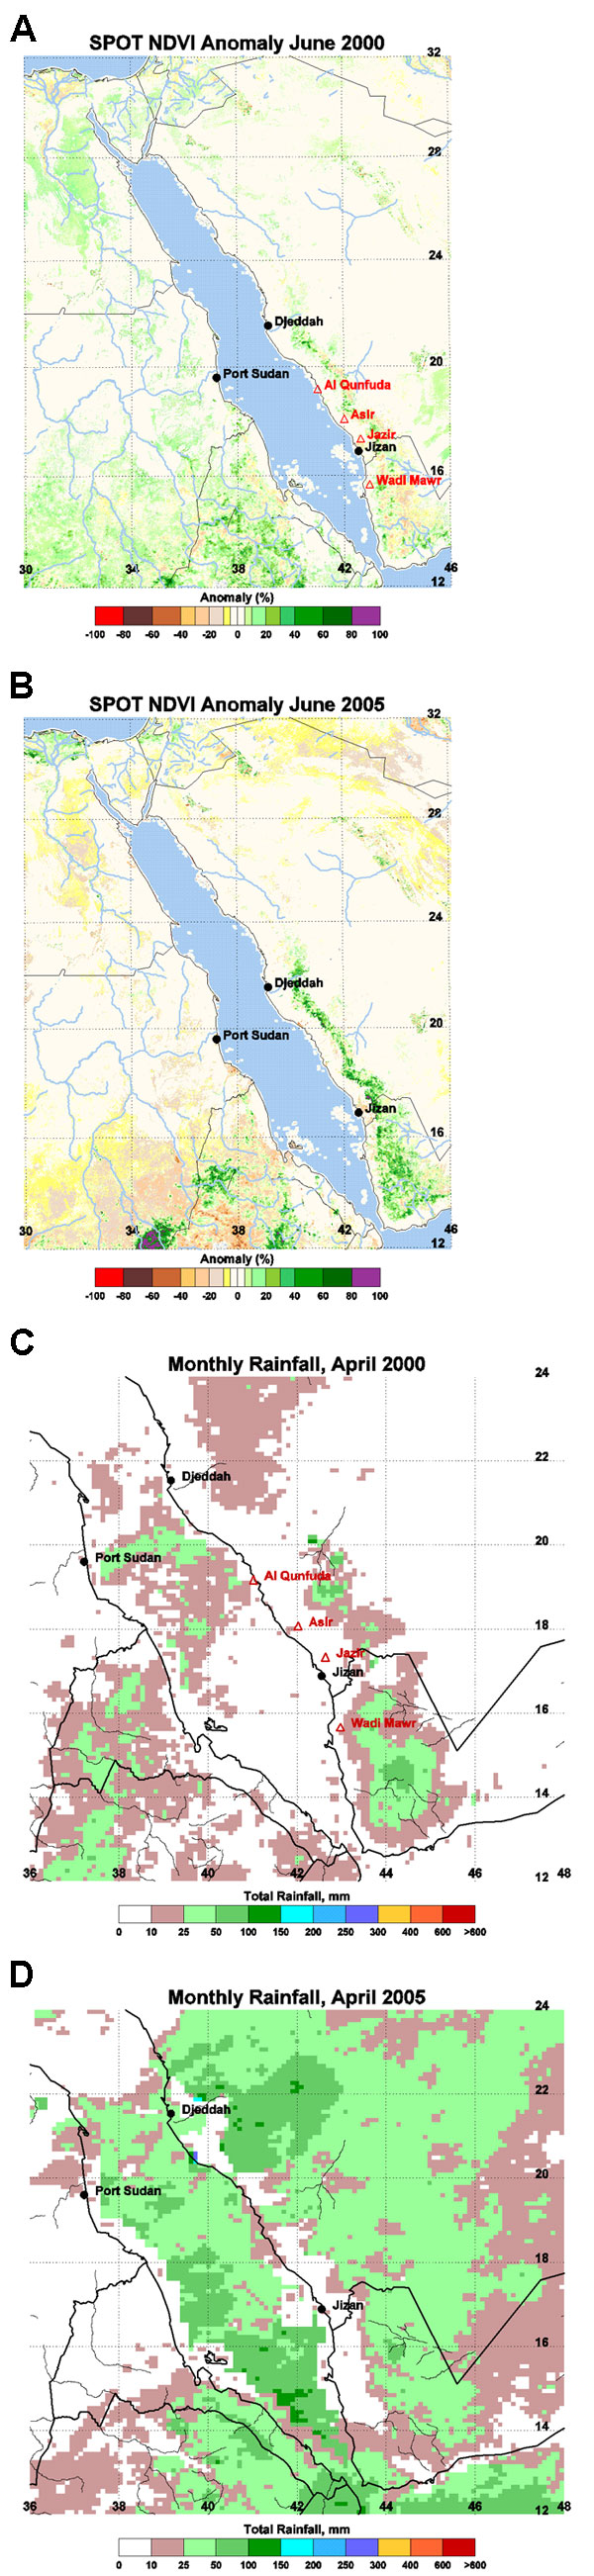  Figure A1. Systeme Probatoire pour l'Observation de la Terre vegetation sensor 1 km normalized difference vegetation index (NDVI) anomaly images of the Arabian Peninsula region during June 2000 (A) and June 2005 (B). Data are the percentage deviation from the long-term mean calculated for the period January 1999–June 2005 in NDVI units. A value of zero indicates that current values are identical to the 1998–2005 mean. Rift Valley fever virus was isolated in the Al Qunfuda, Asir, and Jazir areas